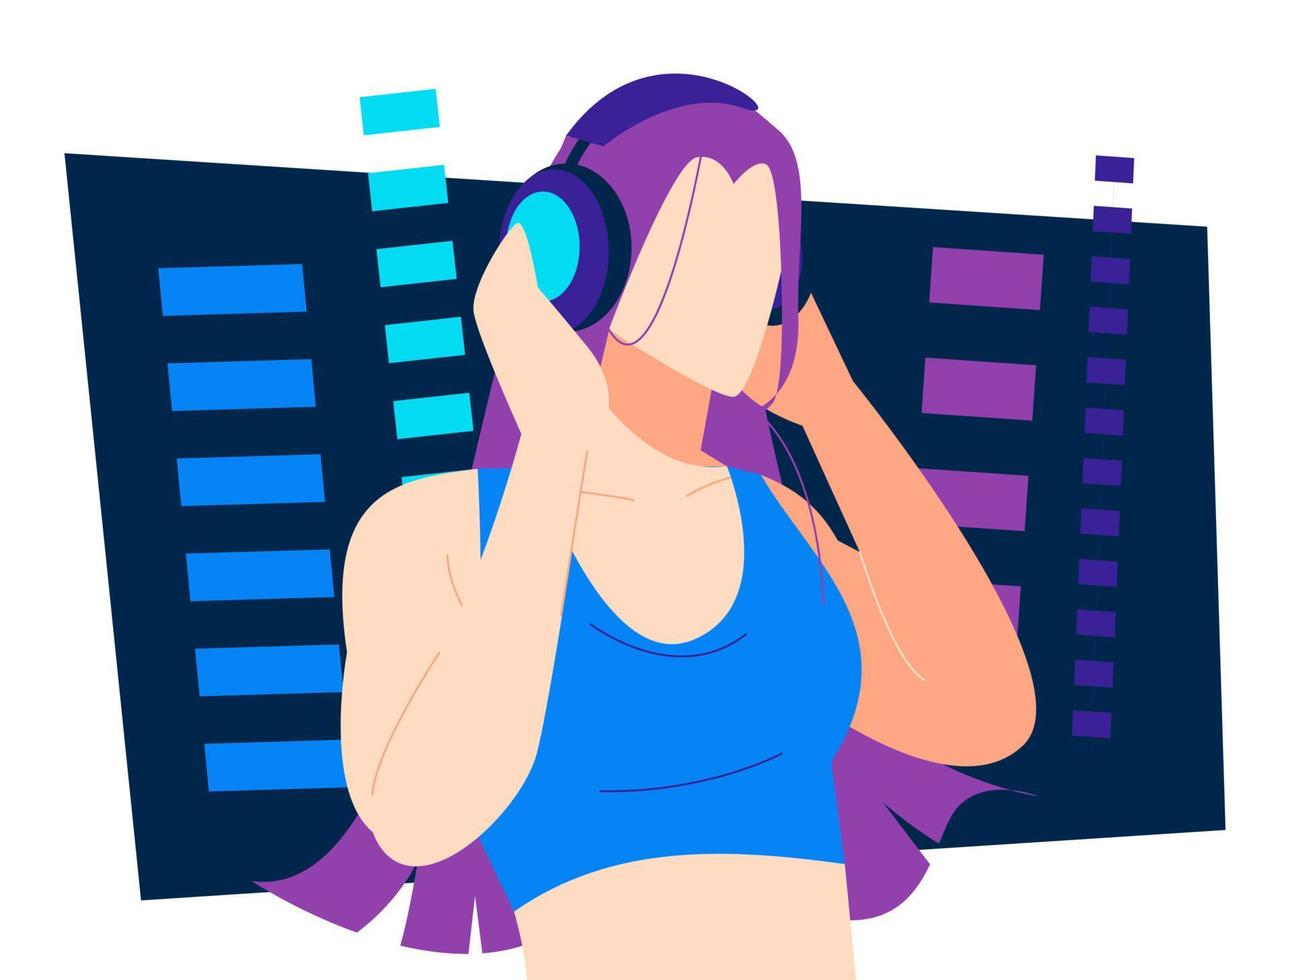 woman listening to music using headphones. graphic equalizer background. suitable for the theme of art music, hobbies, dance, beat, dj, club, etc. flat vector illustration